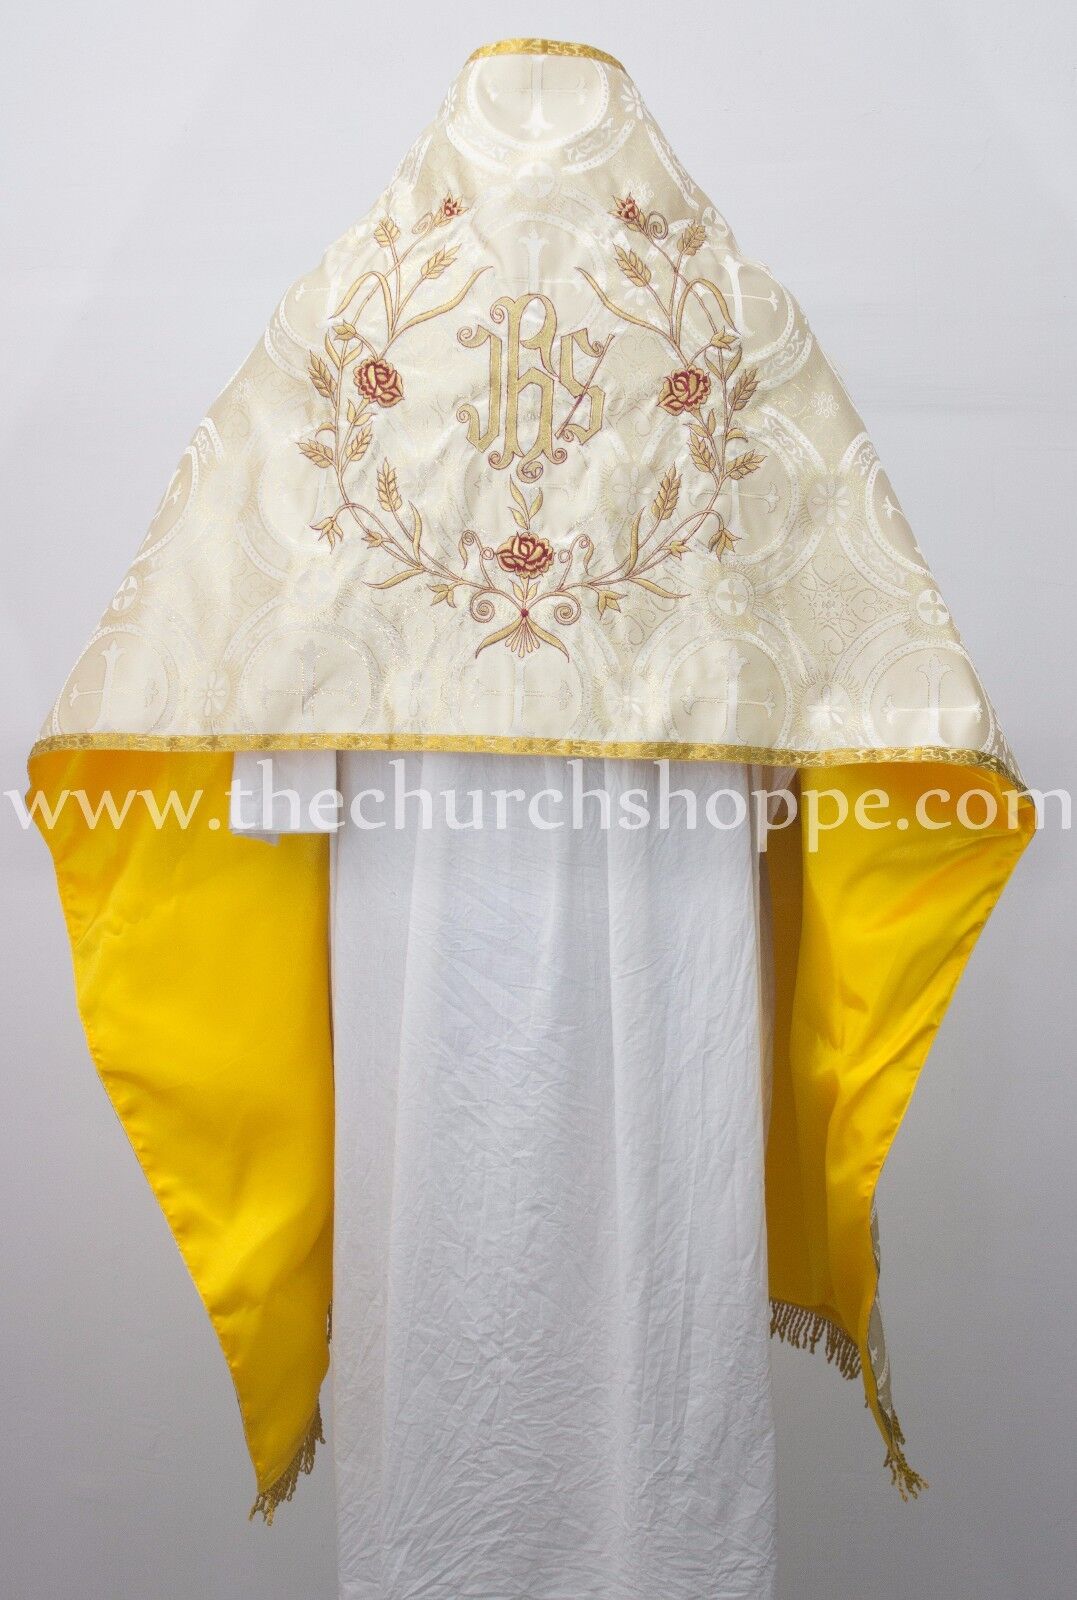 New Metallic Gold Humeral Veil with IHS embroidery,voile huméral,velo omerale